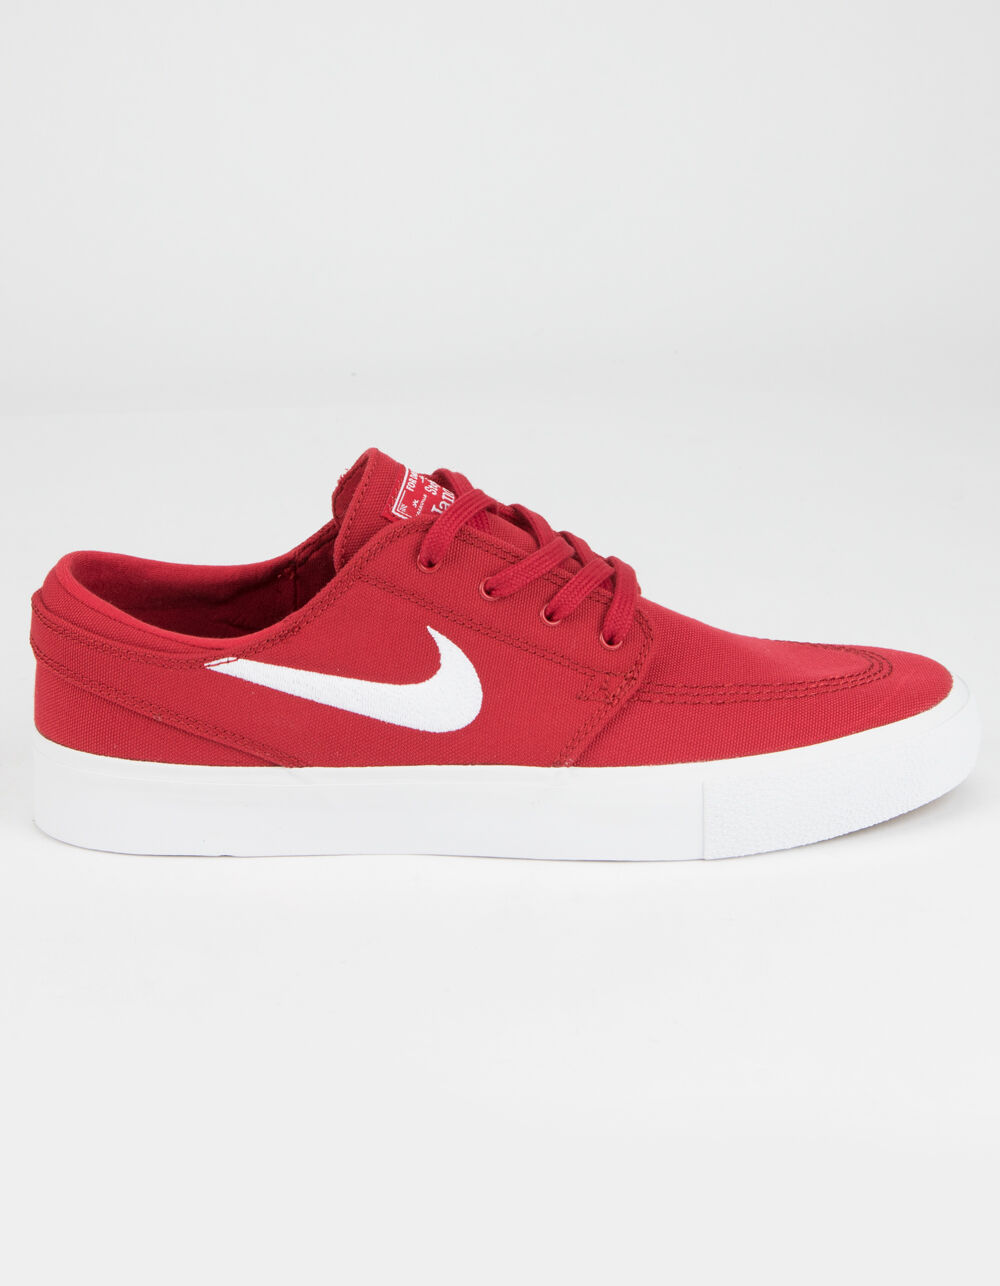 NIKE SB Stefan Janoski Canvas RM Red Shoes - RED Tillys